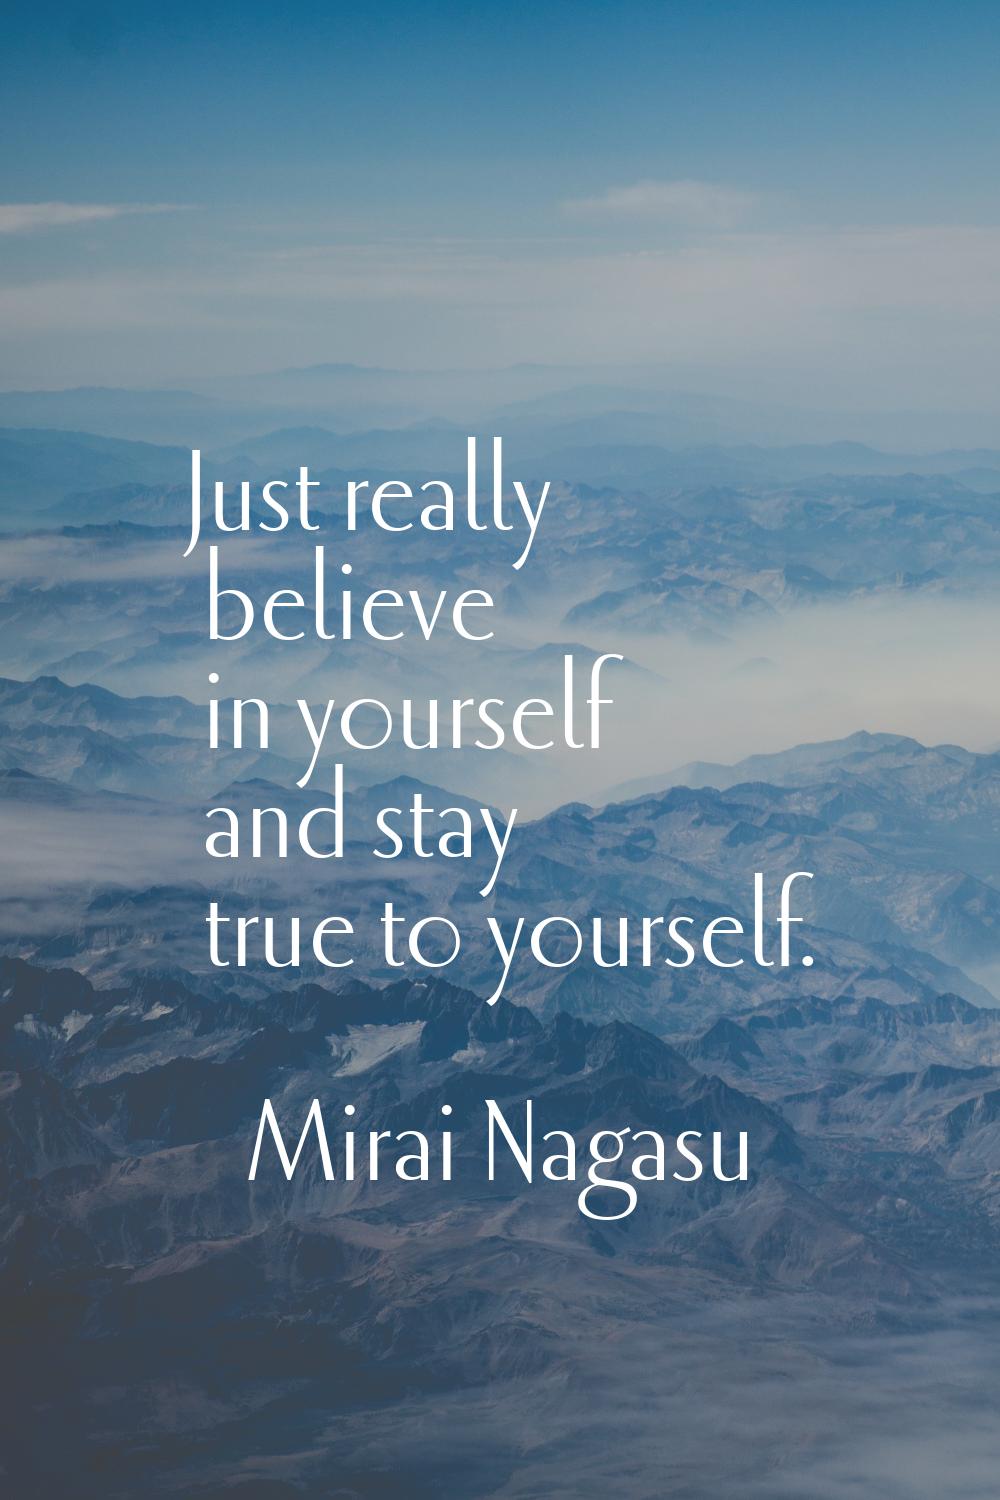 Just really believe in yourself and stay true to yourself.